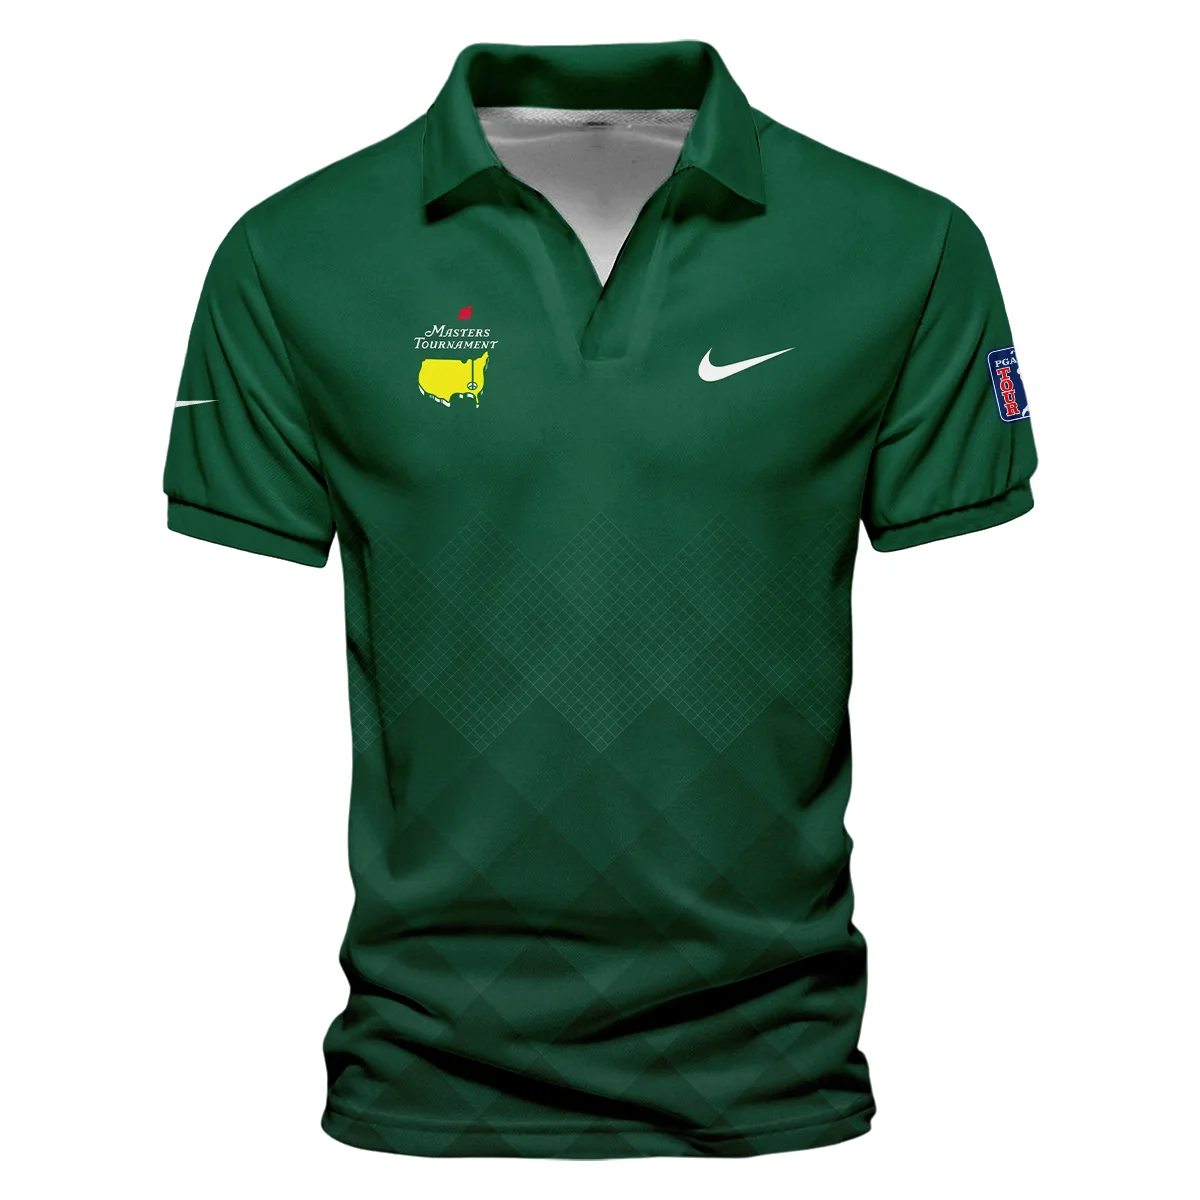 Masters Tournament Nike Gradient Dark Green Pattern Vneck Polo Shirt Style Classic Polo Shirt For Men